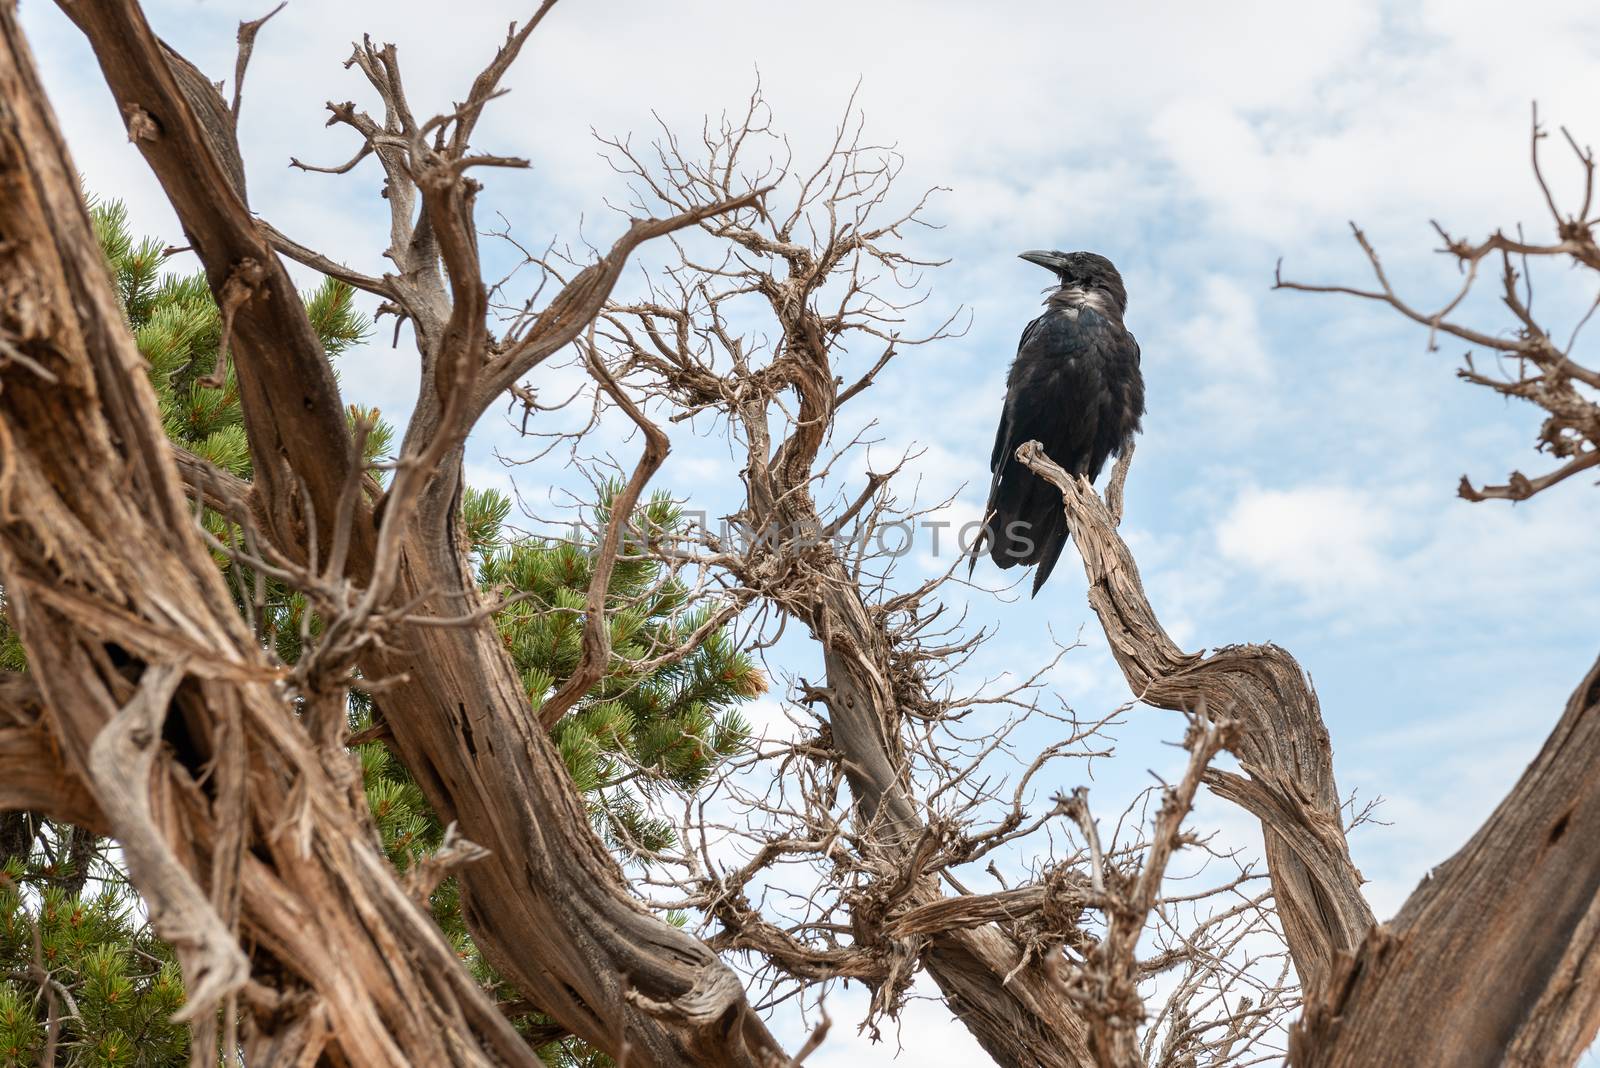 Crow in a tree off Devils Garden Trail in Arches National Park, Utah by Njean